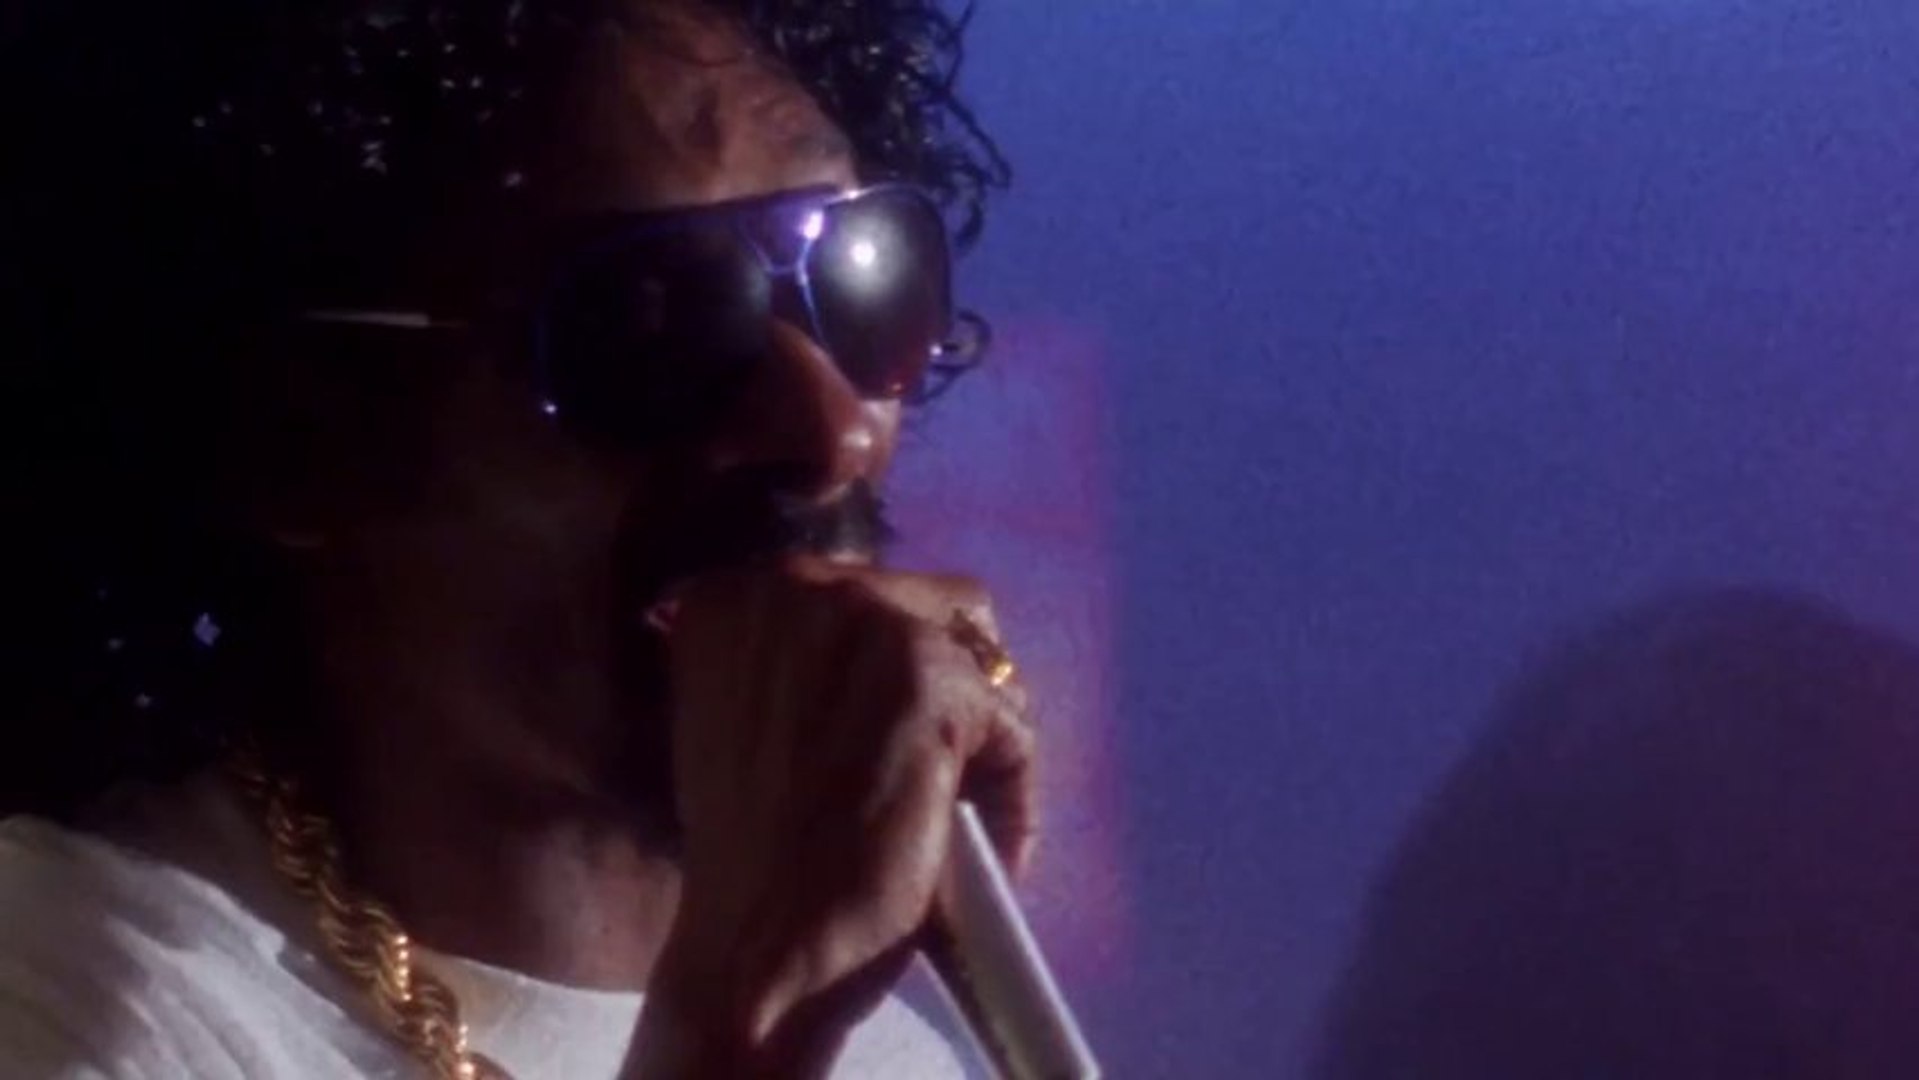 Video: Snoop Dogg and Dâm-Funk: Faden Away